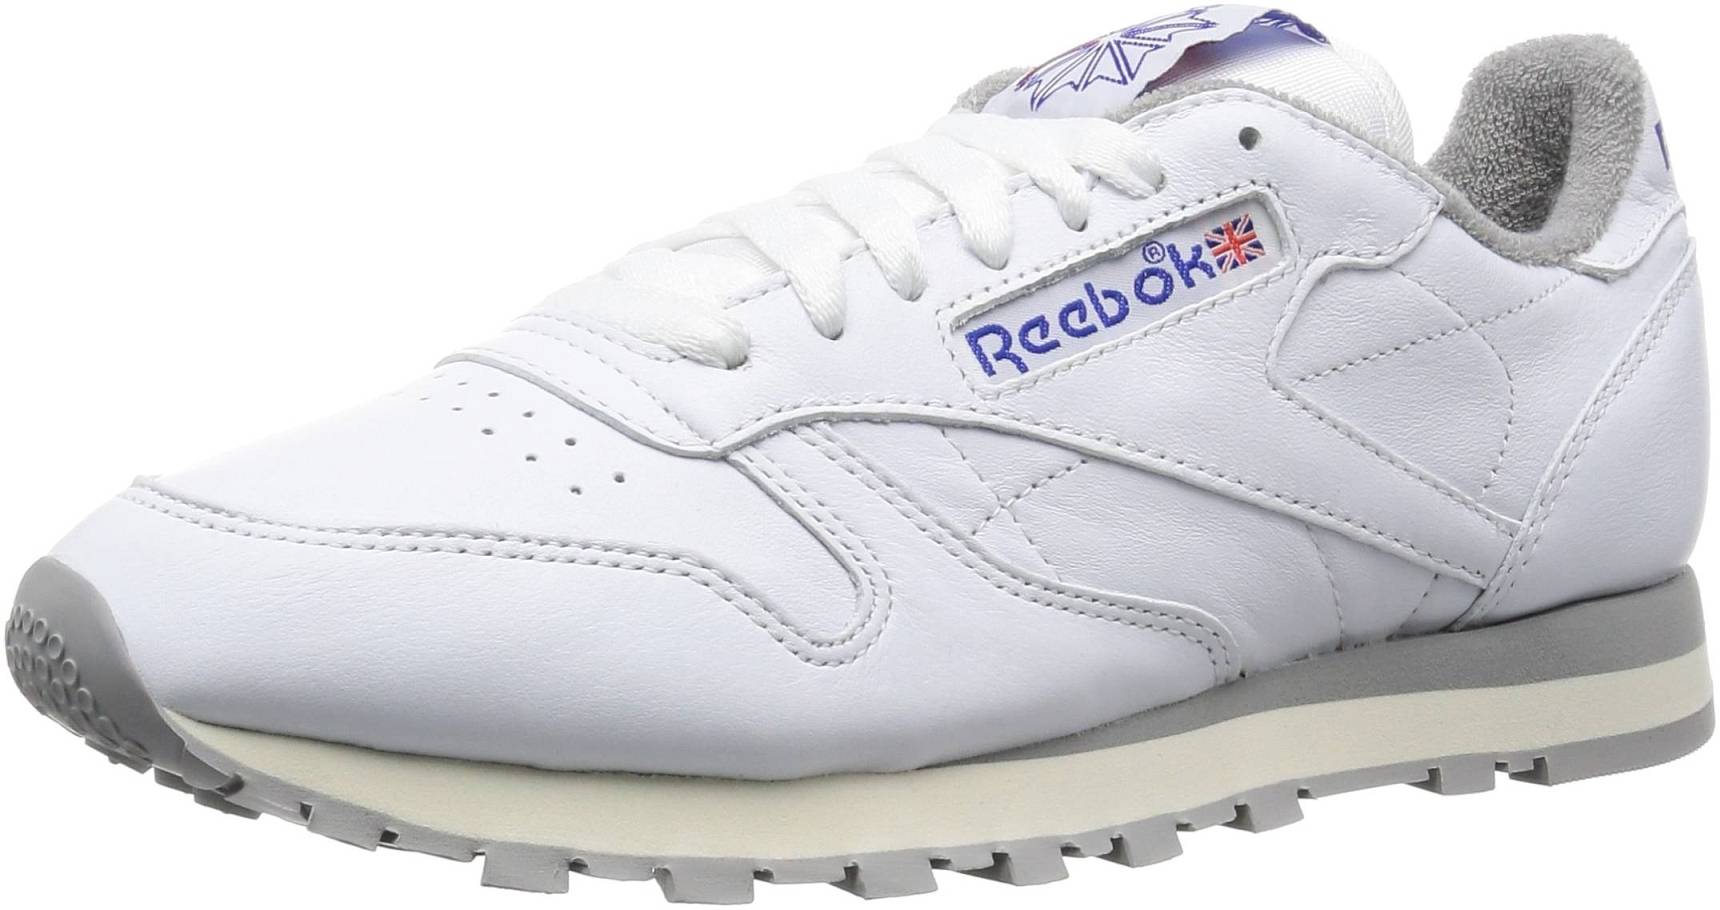 Reebok Classic Leather R12 – Shoes Reviews & Reasons To Buy